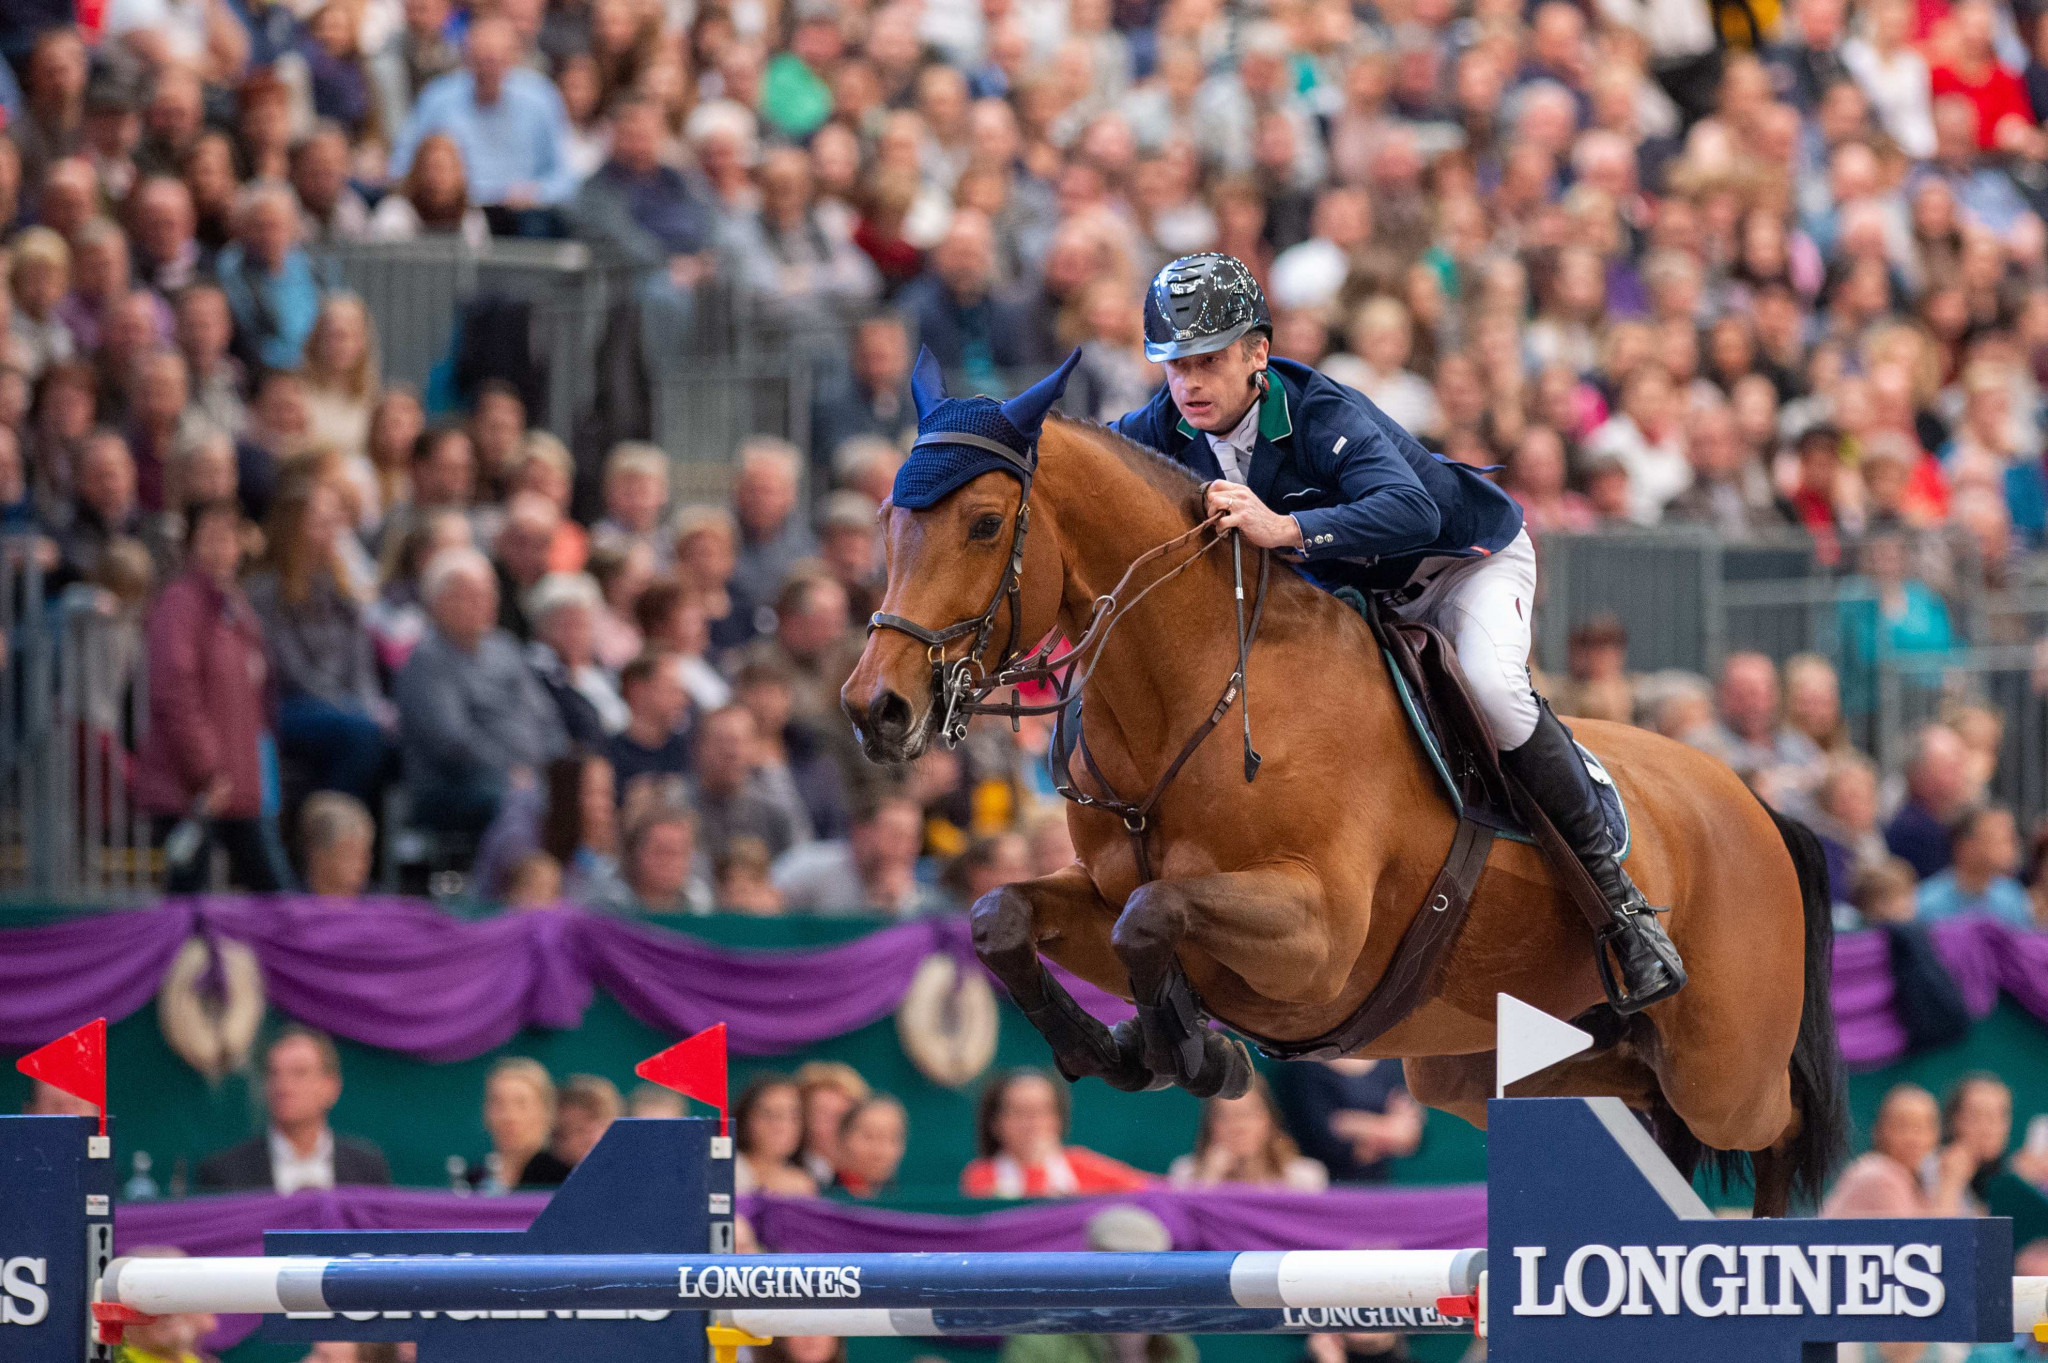 Ireland's Denis Lynch produced a memorable ride on GC Chopin’s Bushi to win the FEI Jumping World Cup 2019-2020 Western European League qualifier in Leipzig today ©FEI